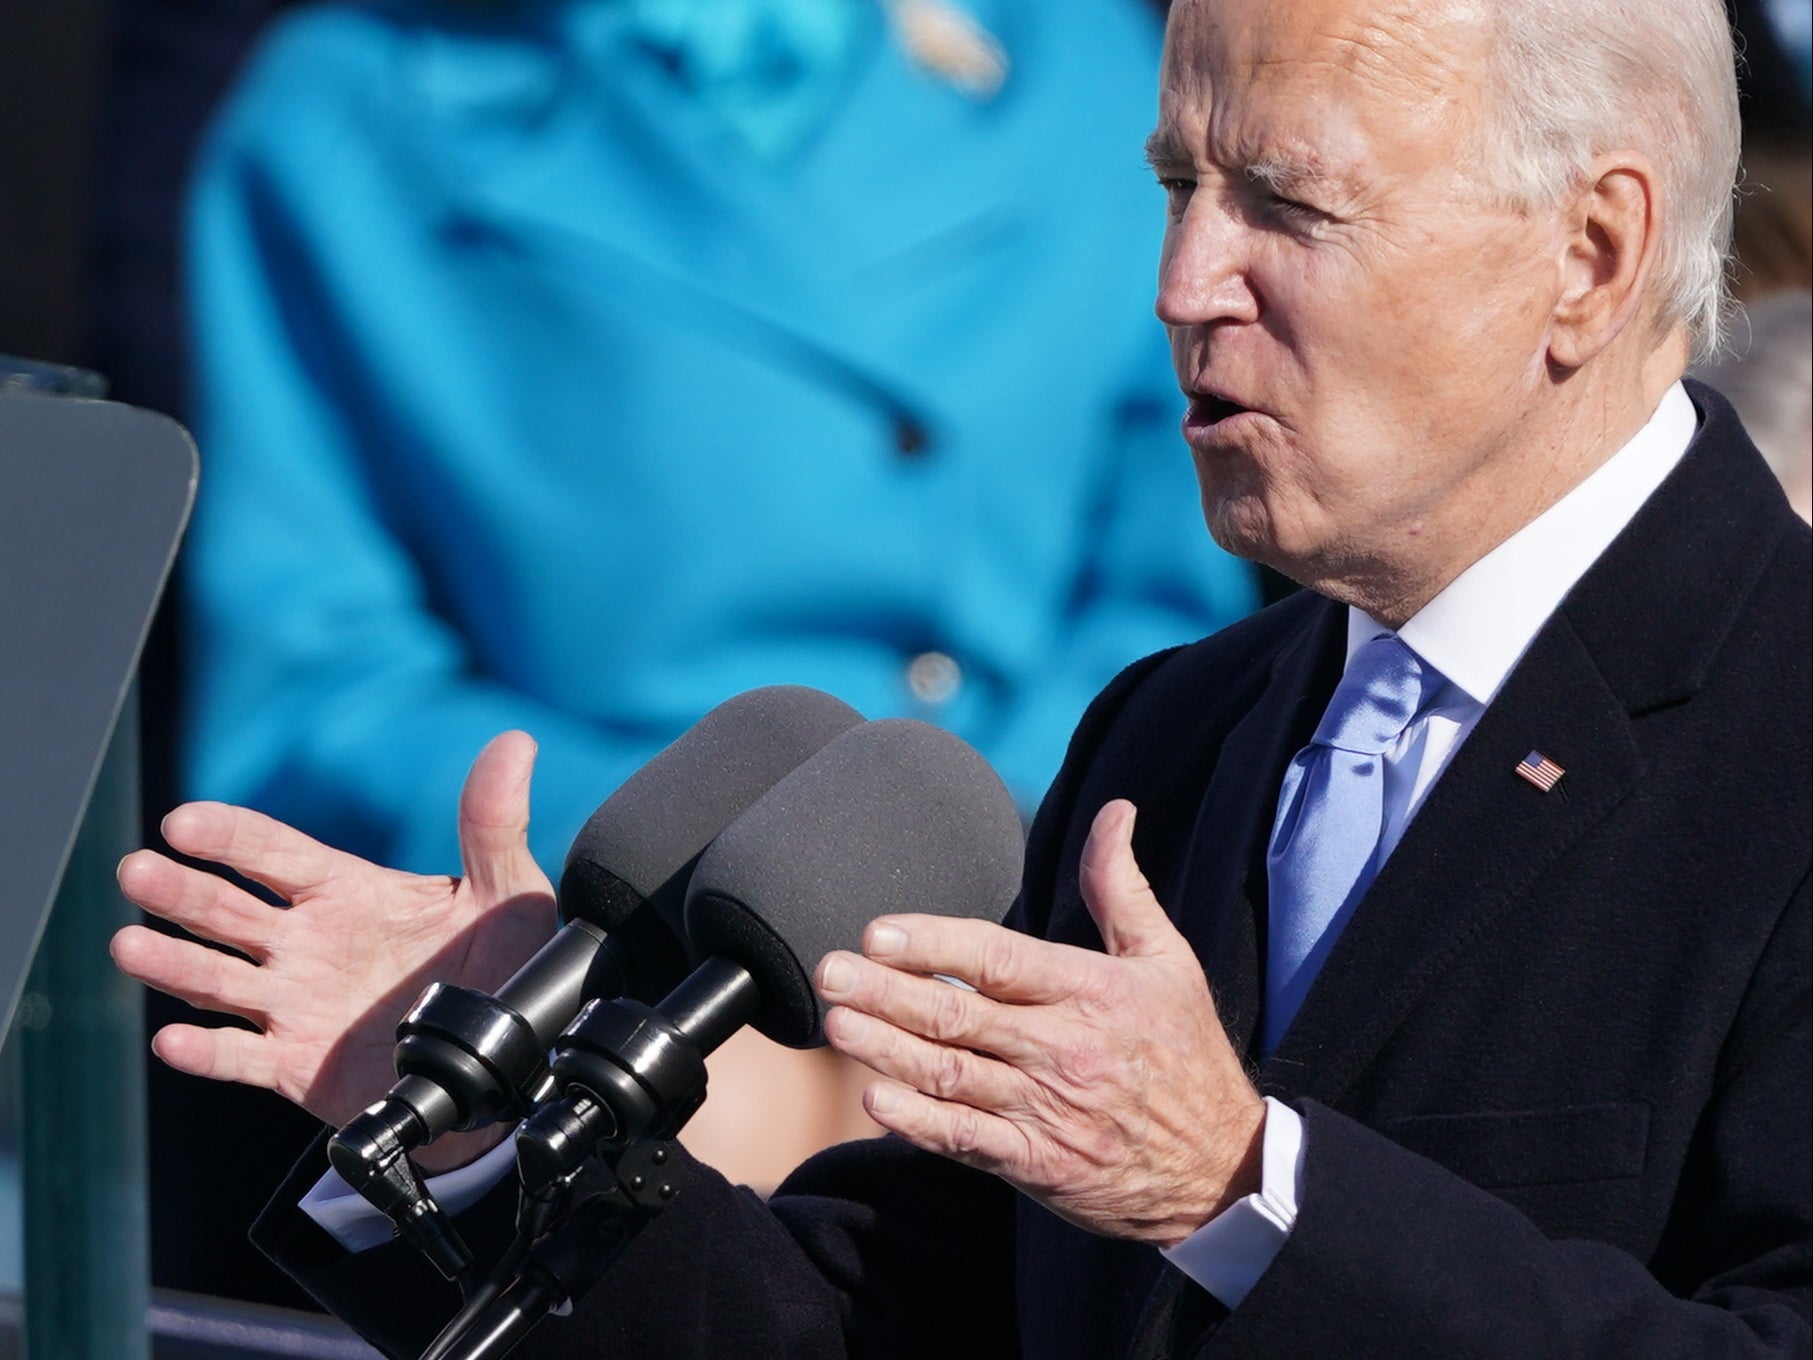 Joe Biden delivers a speech after being sworn in as the 46th President of the United States during which he addressed the severity of the coronavirus pandemic across the US, the rise of political extremism, and outlined a path towards unity for the nation